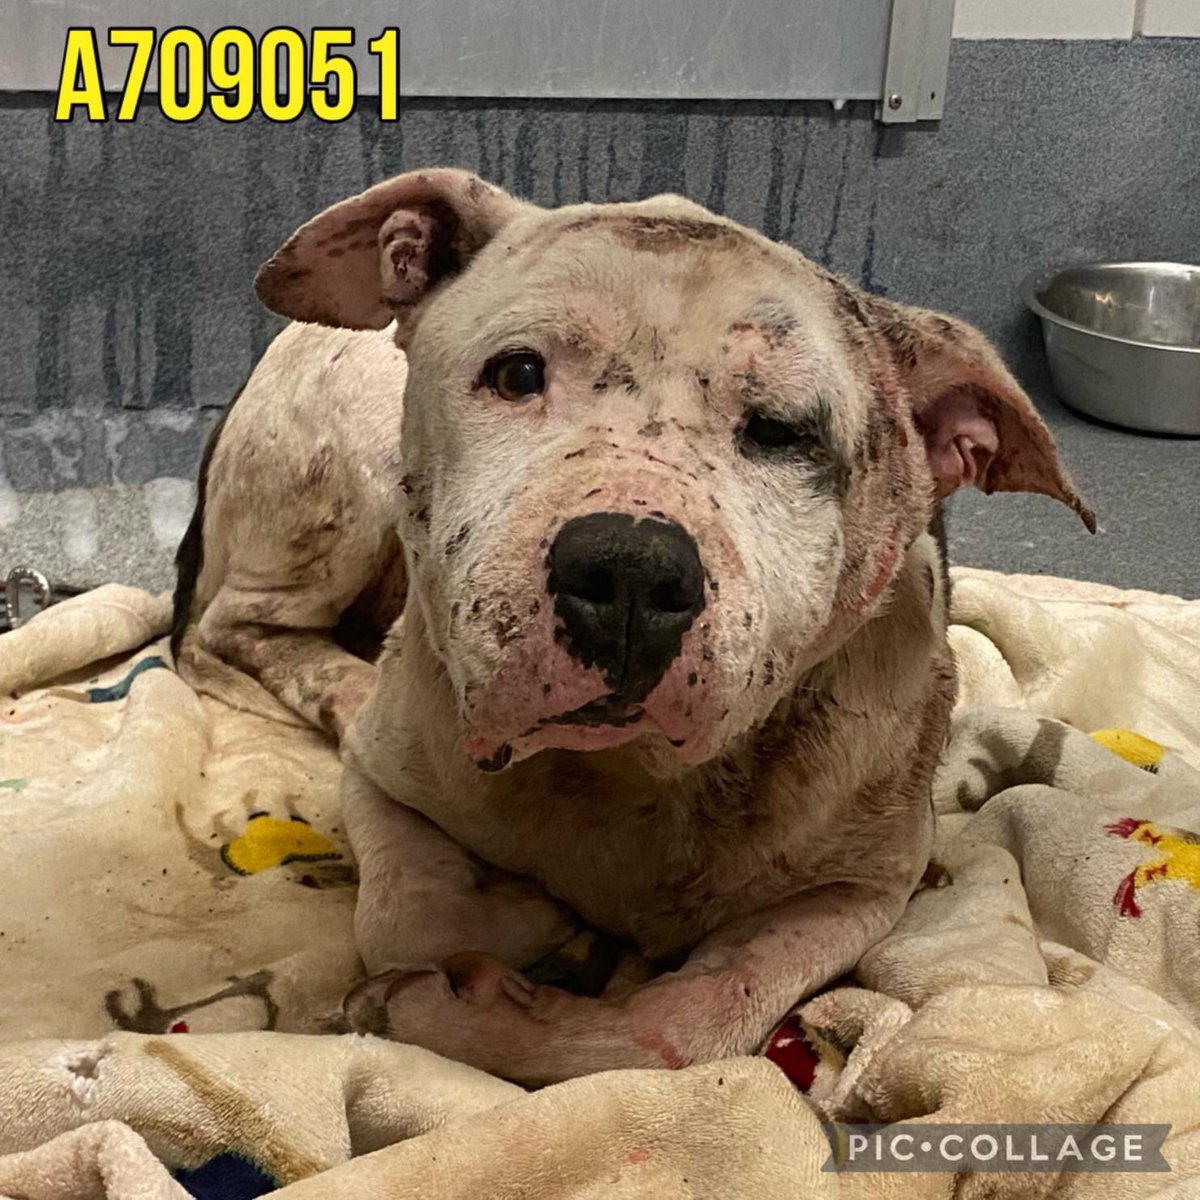 Poor sweet TITUS #A709051 is still waiting to DIE at #SanAntonio Shelter! He has wounds all over his little body, swelling,he needs medical care & a loving 🏡! He is so tender & sweet even while in pain! PLZ #ADOPT #FOSTER OR #PLEDGE TO ATTRACT A RESCUE 🛟 #TEXAS PLZ save TITUS